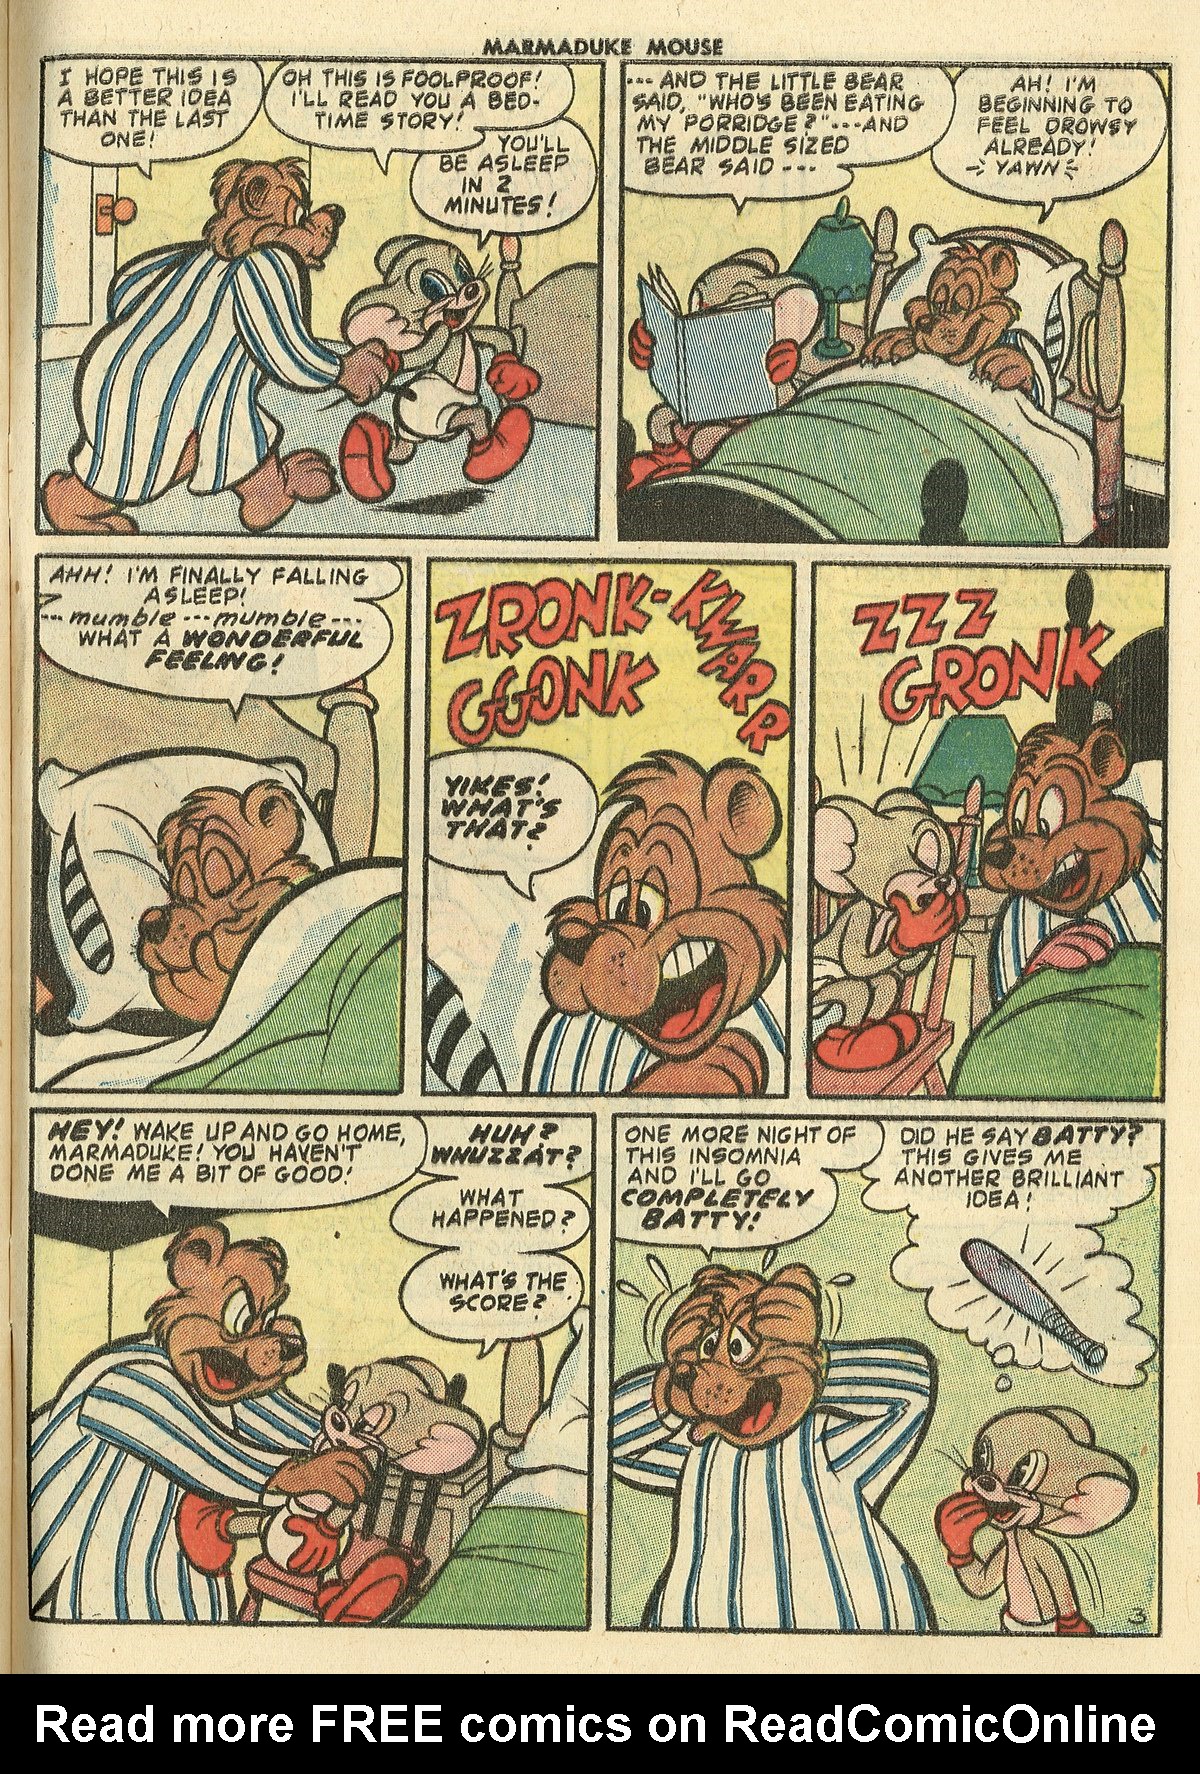 Read online Marmaduke Mouse comic -  Issue #49 - 31